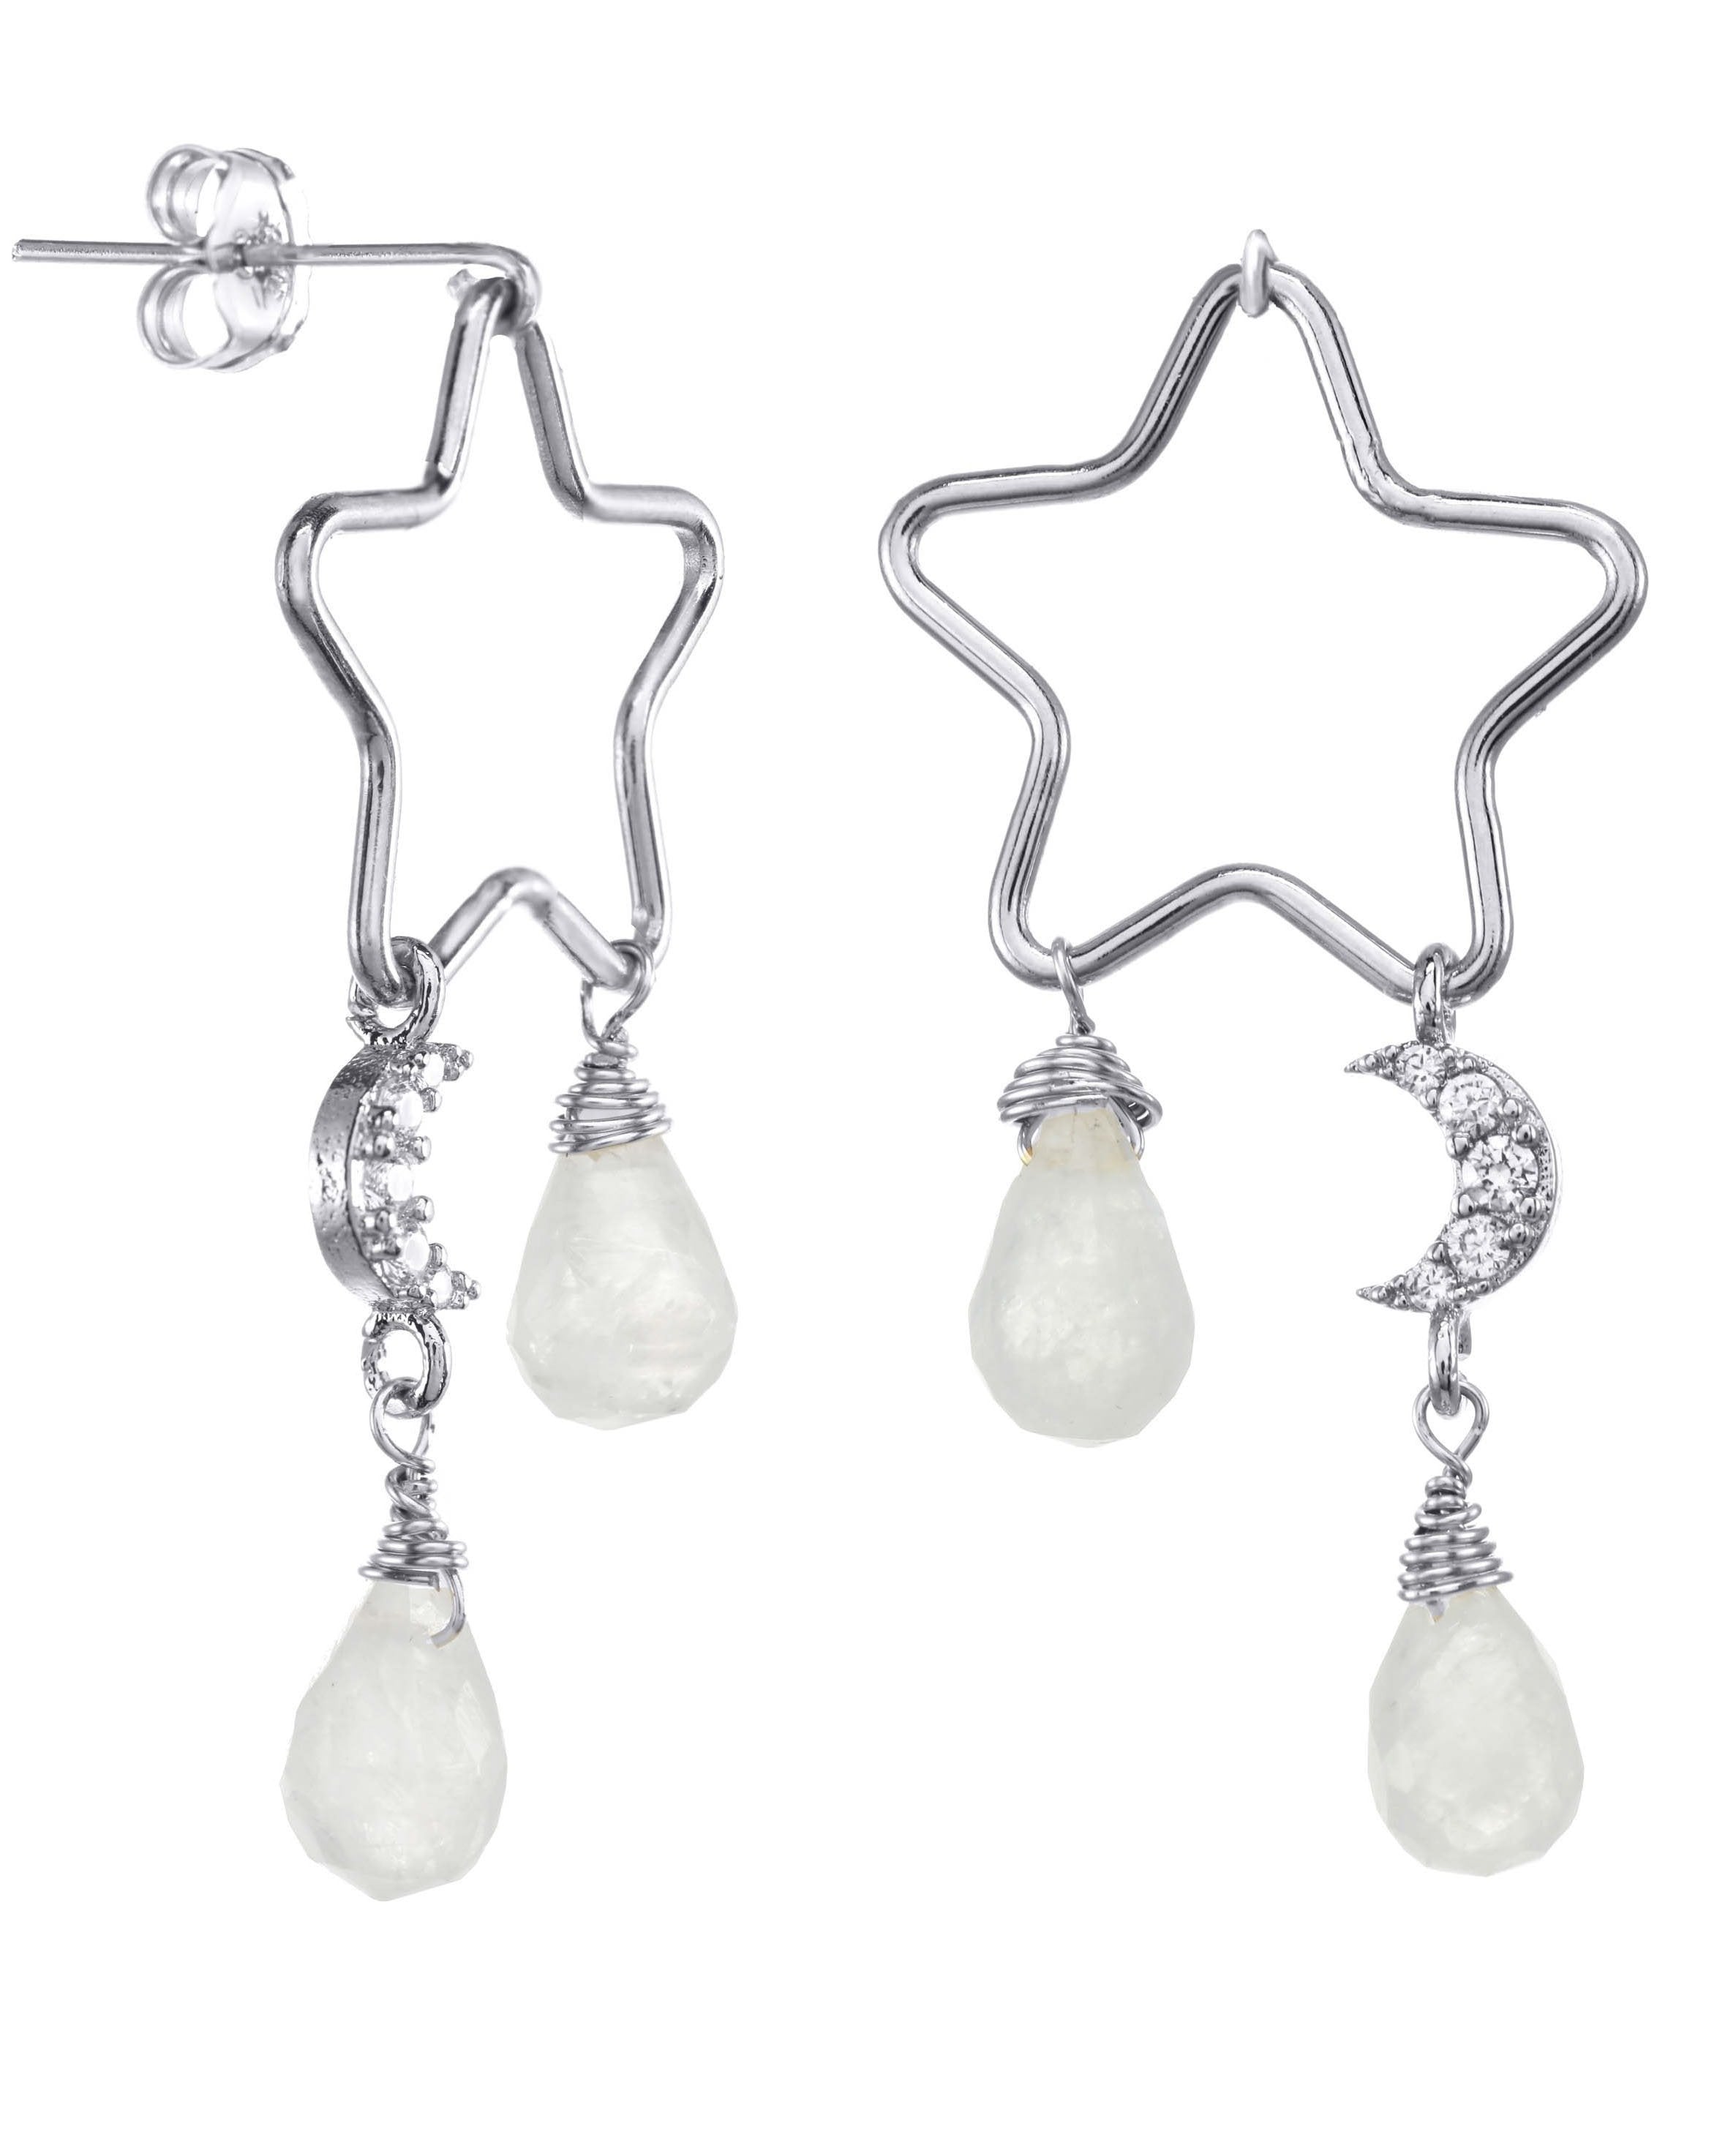 Lyra Earrings by KOZAKH. Dangling style stud earrings crafted in Sterling Silver, featuring a star wire charm, faceted Moonstone droplets, and a Cubic Zirconia encrusted moon charm.